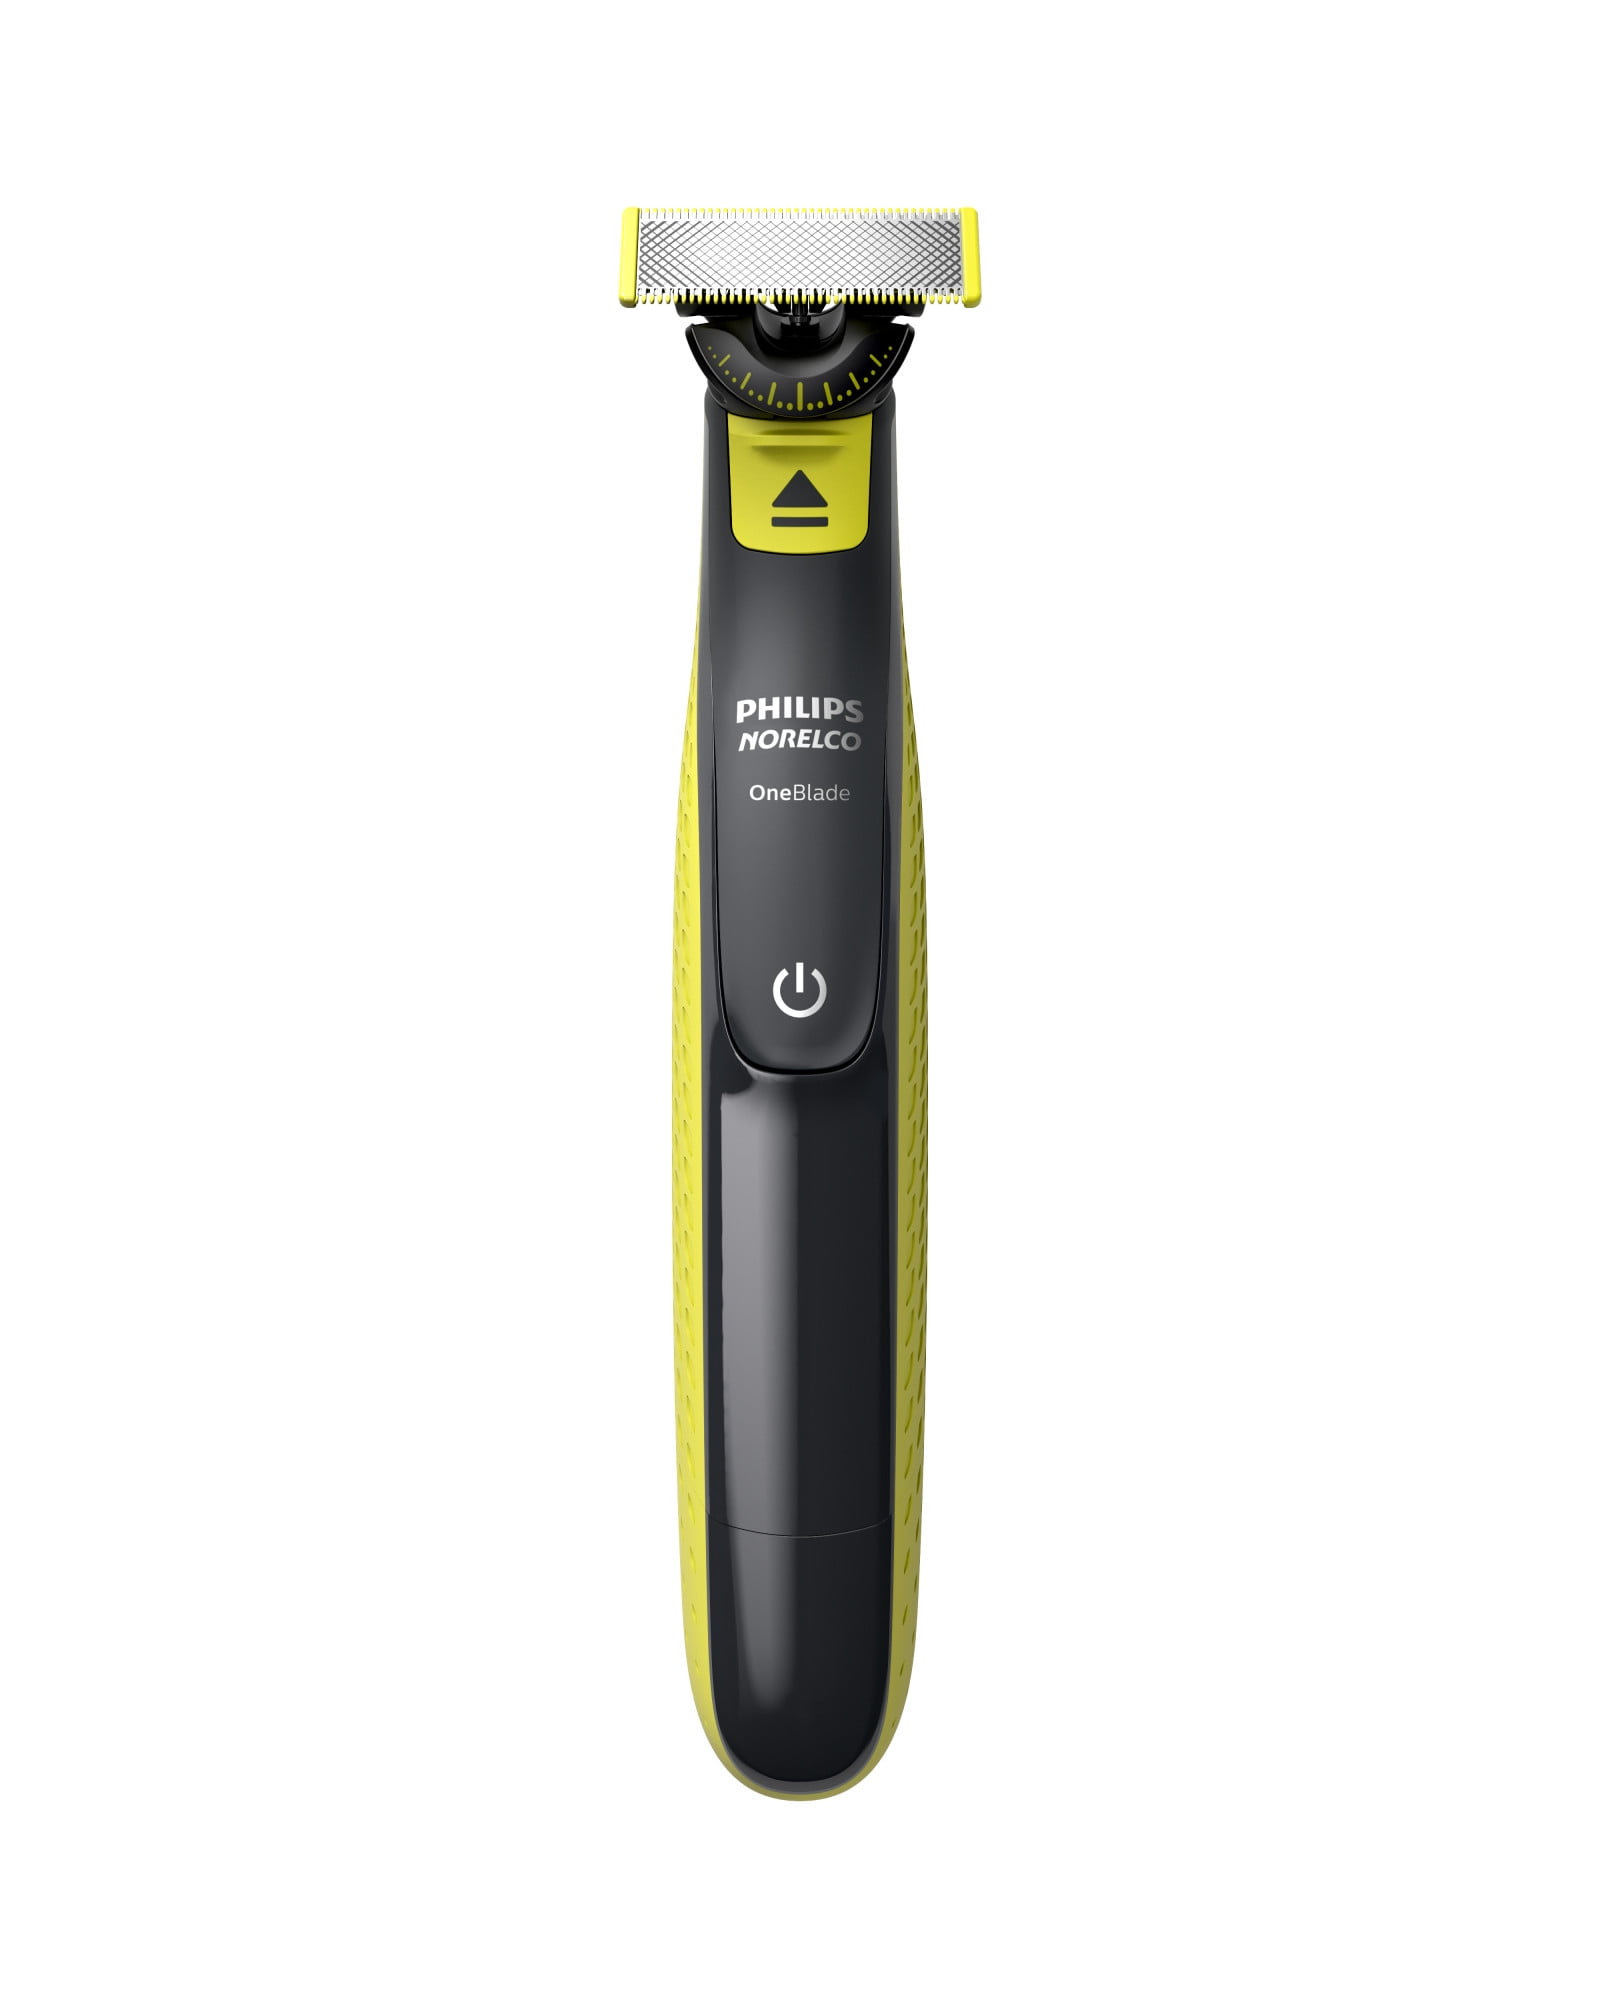 Philips Norelco OneBlade 360 Face, Electric Razor and Beard Trimmer with  5-Length Comb and 360 blade technology for fewer passes and more comfort